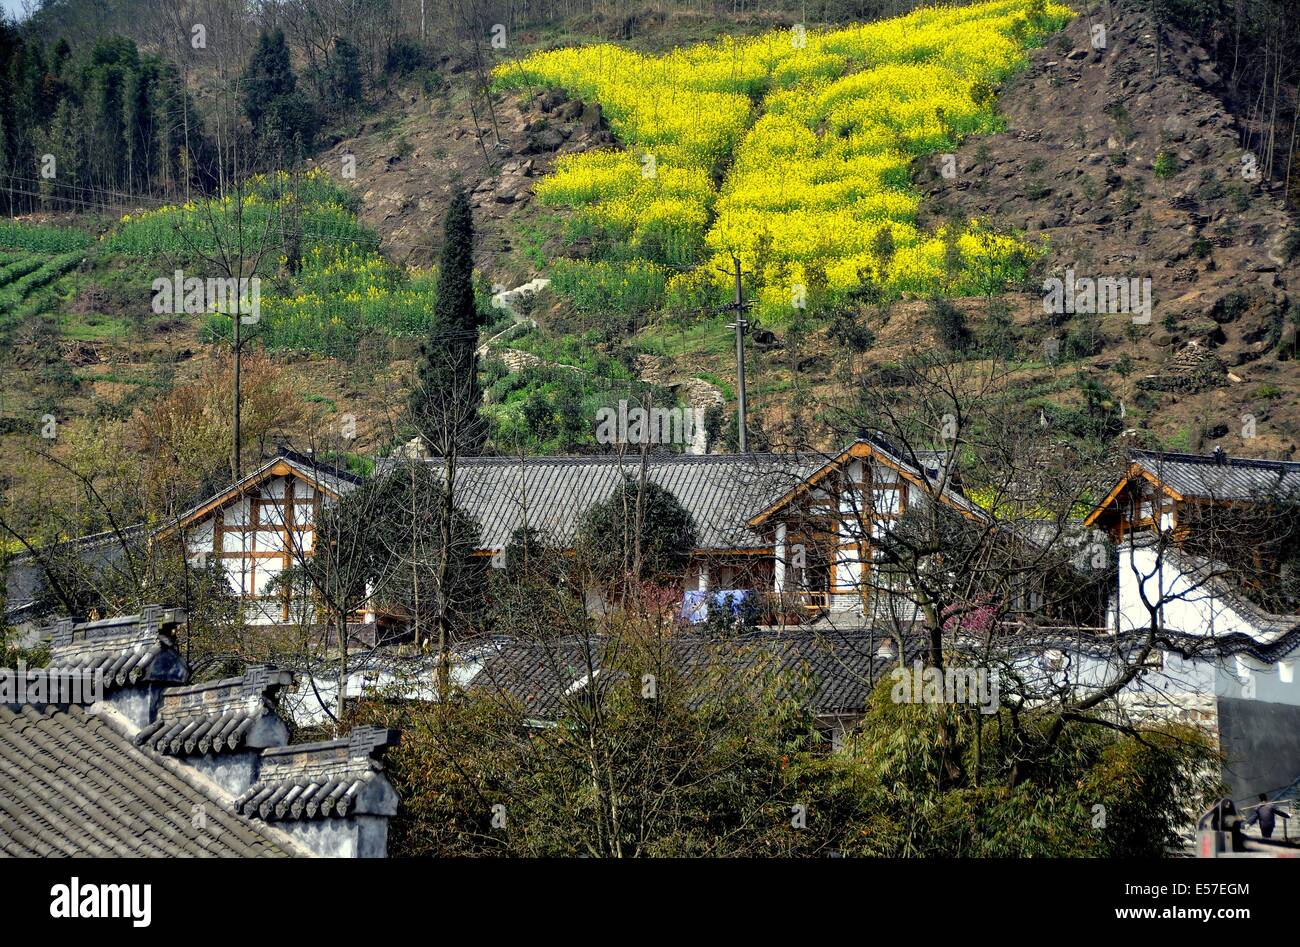 XIN XING ZHEN, CHINA:  Old farmhouses with tiled roofs set against hills covered with bamboo forests and yellow Rapeseed Stock Photo